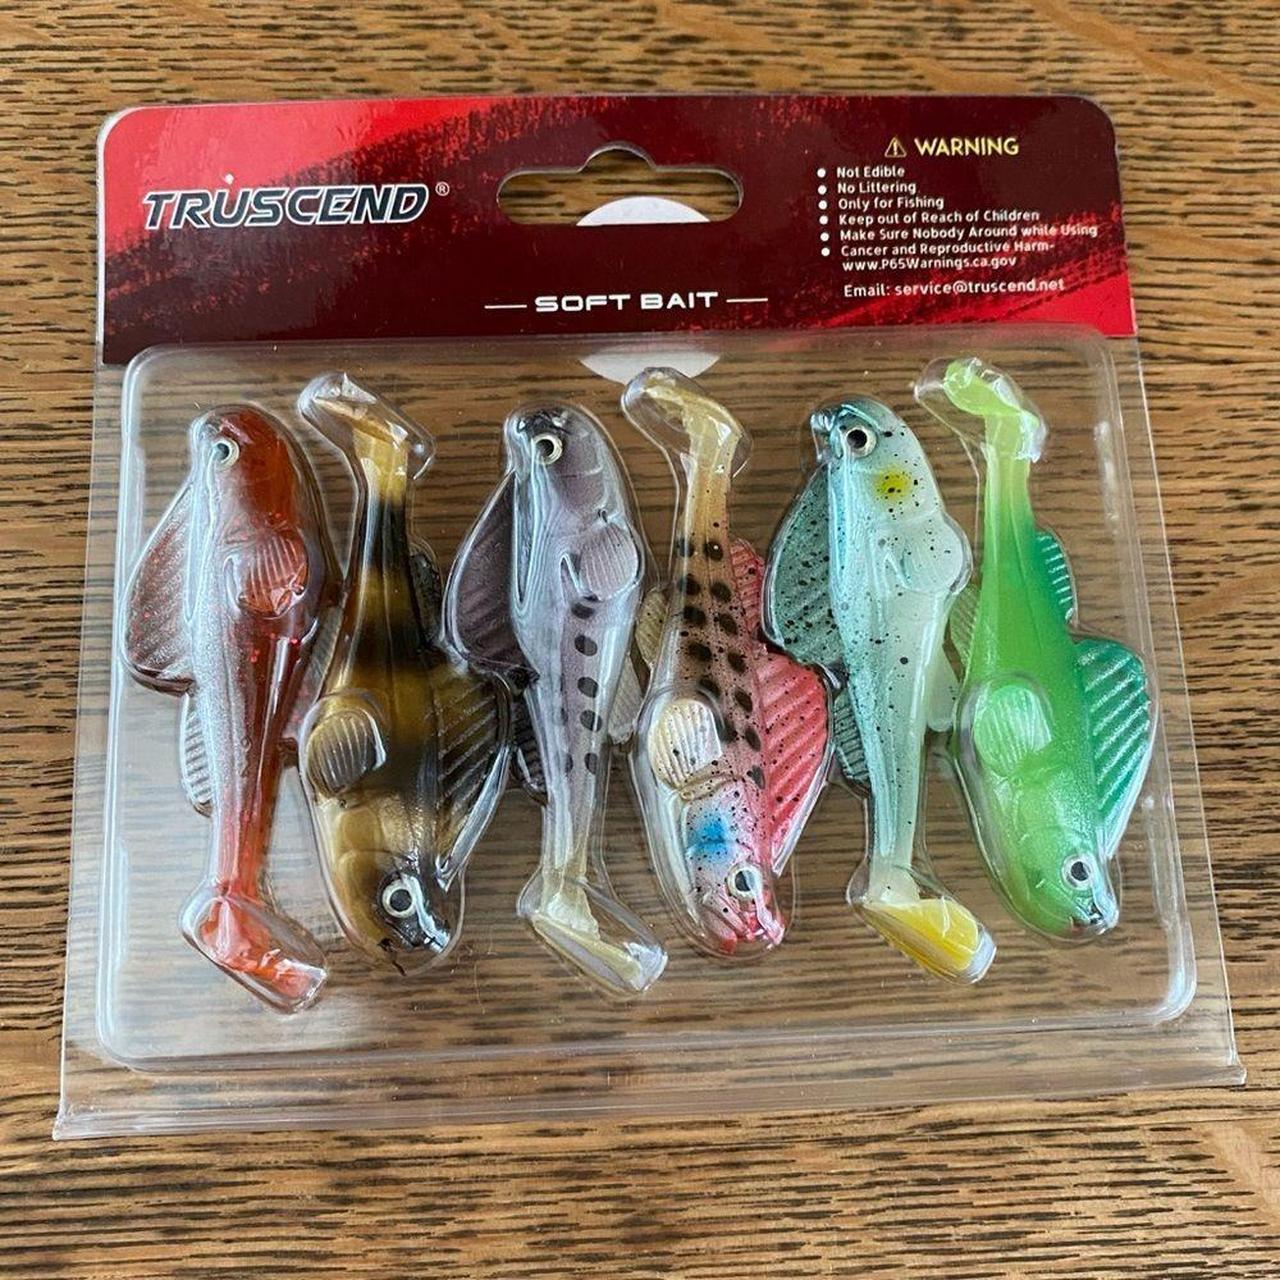 Truscend Soft Bait Fishing Lures. Six Lures. New! - Depop